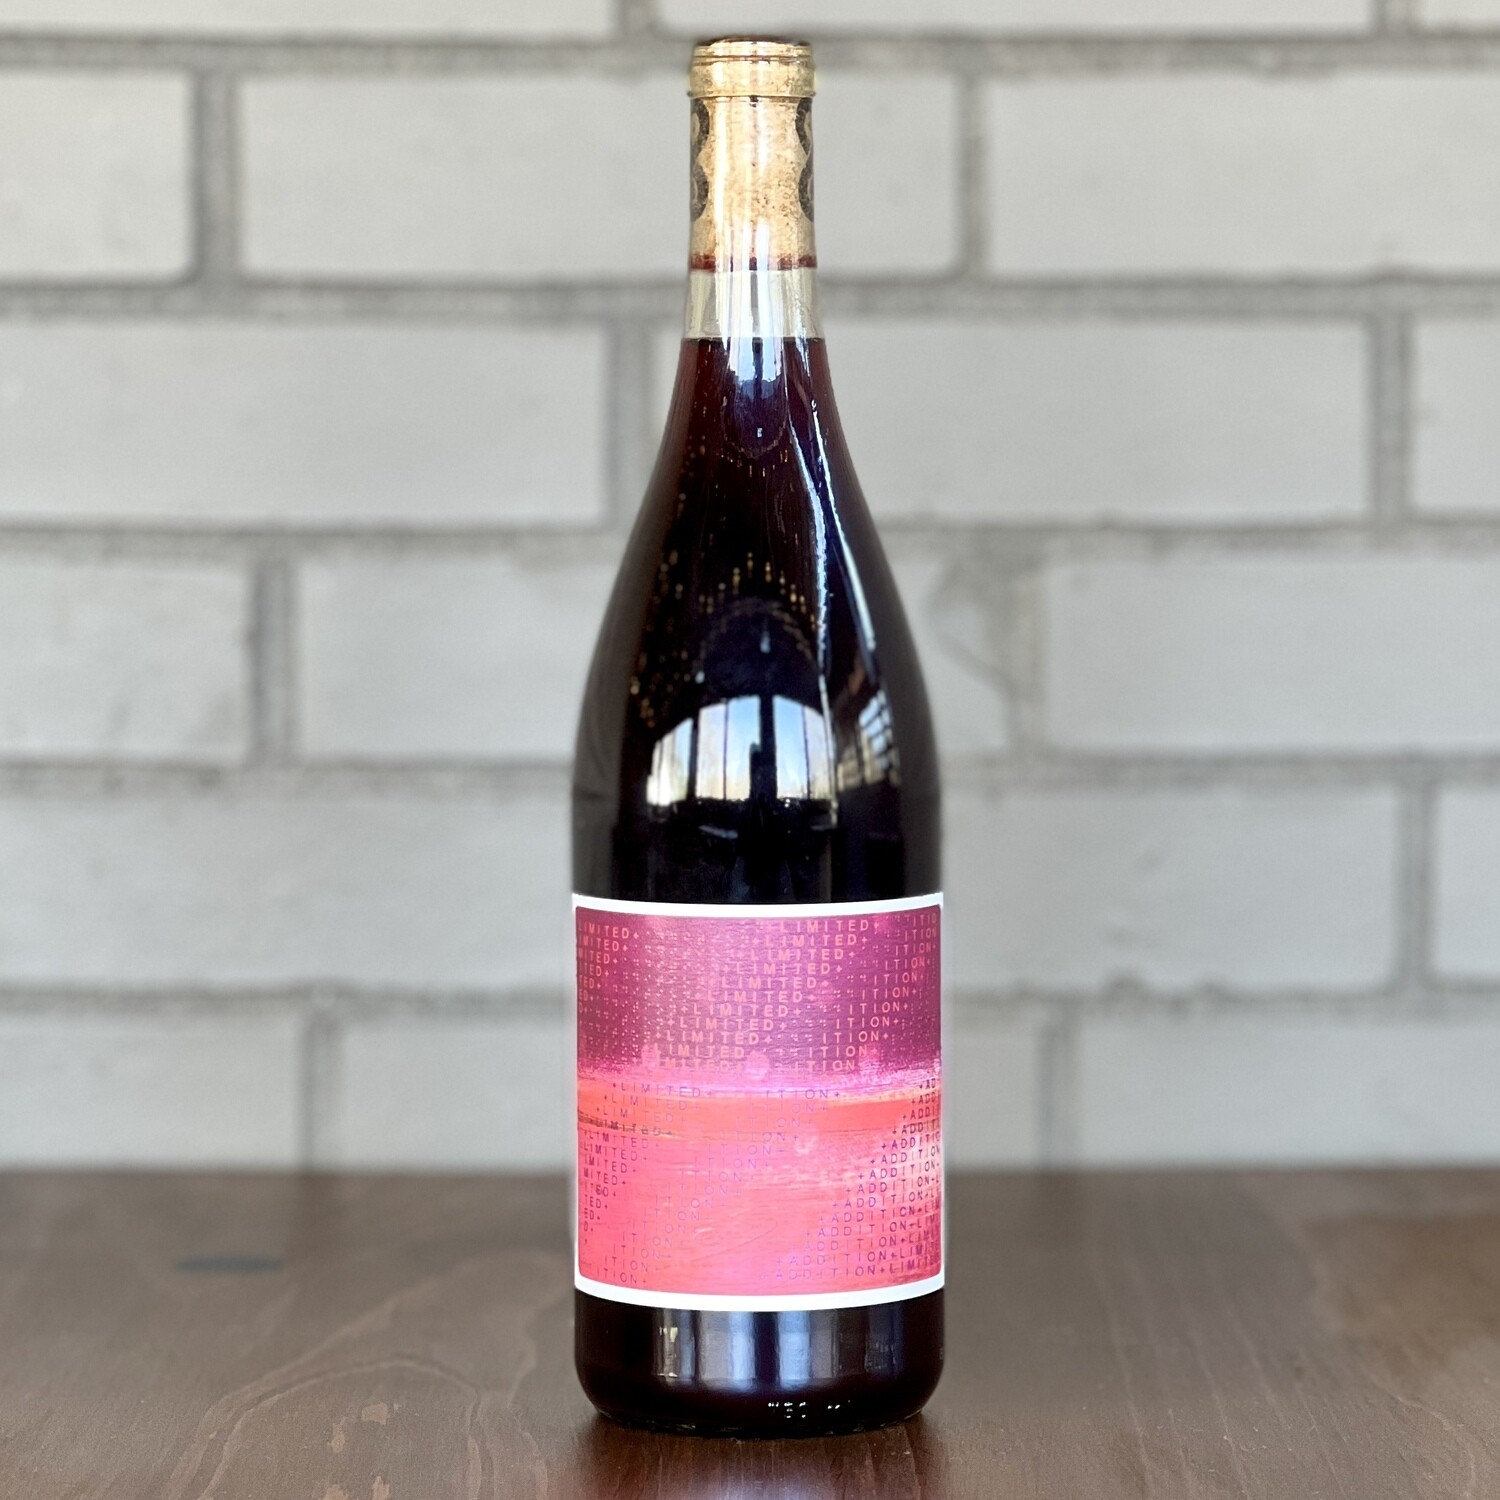 Limited Addition Eola Springs Trousseau/Gamay Blend (750ml)